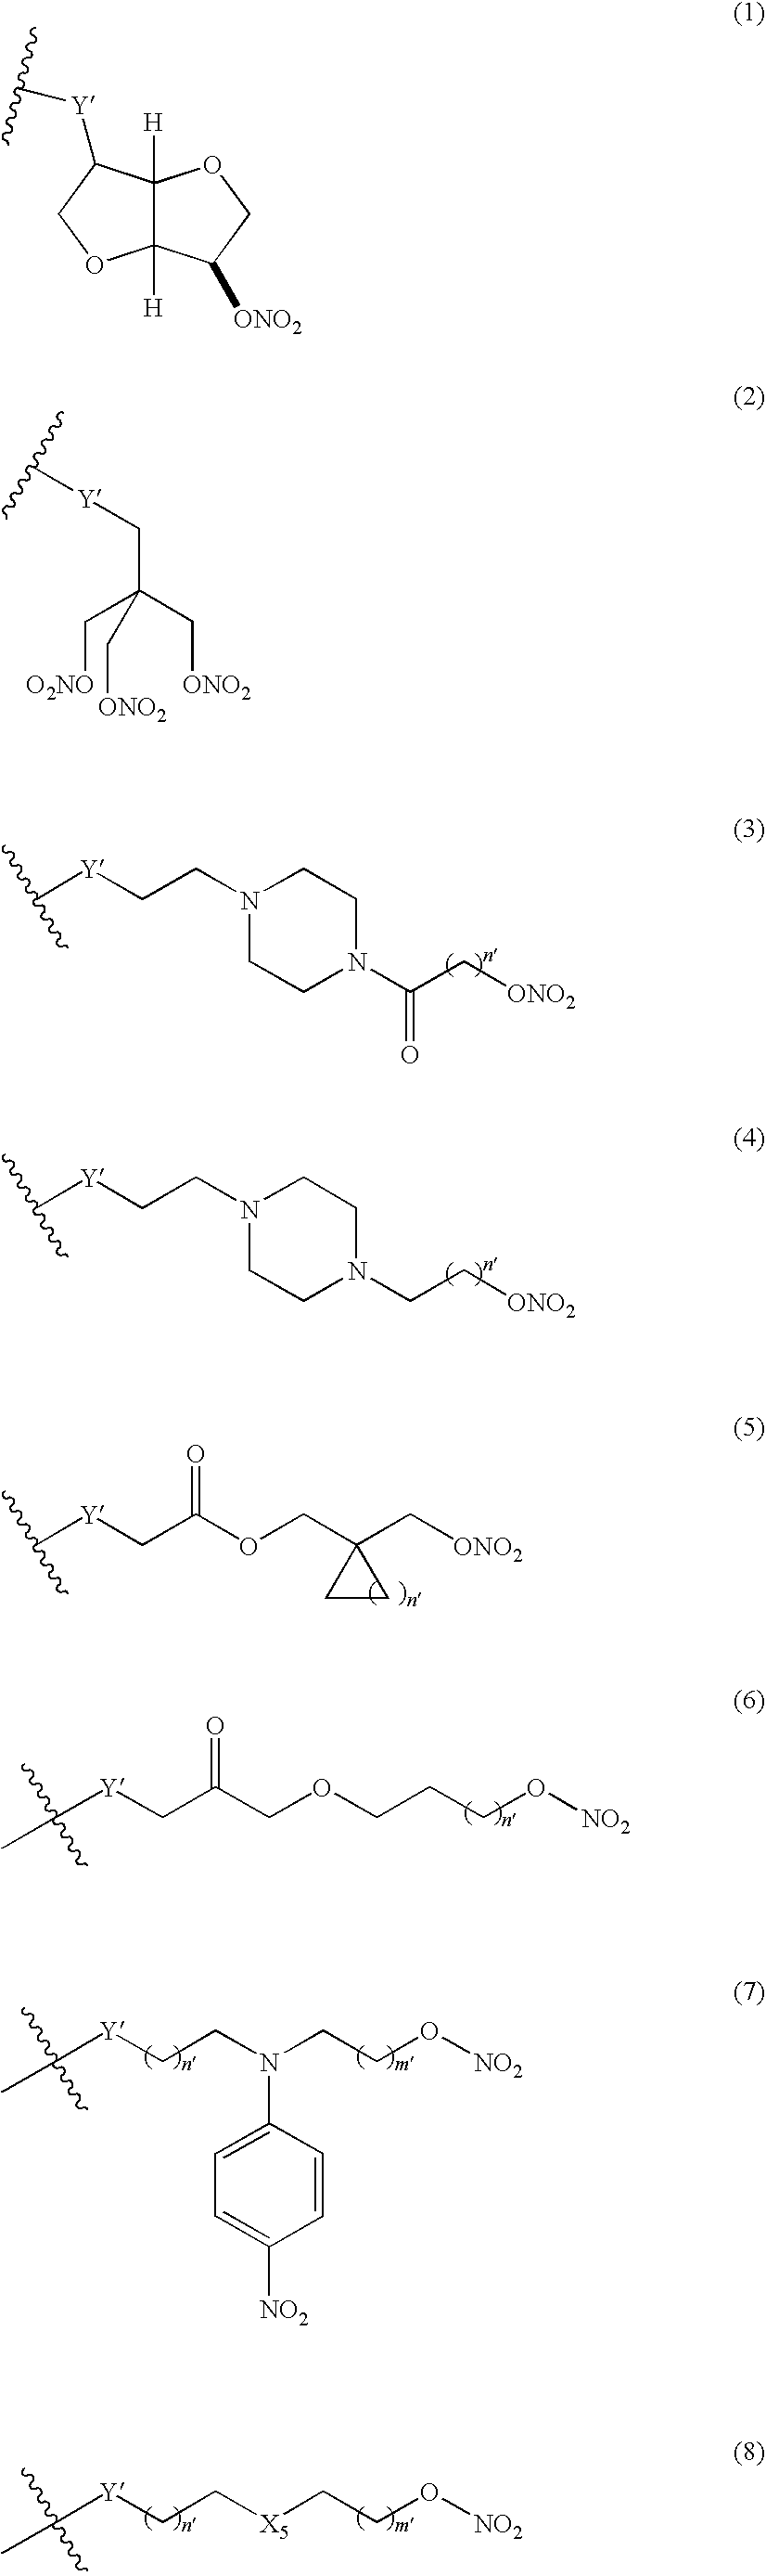 Nitrosated and/or nitrosylated compounds, compositions and methods of use